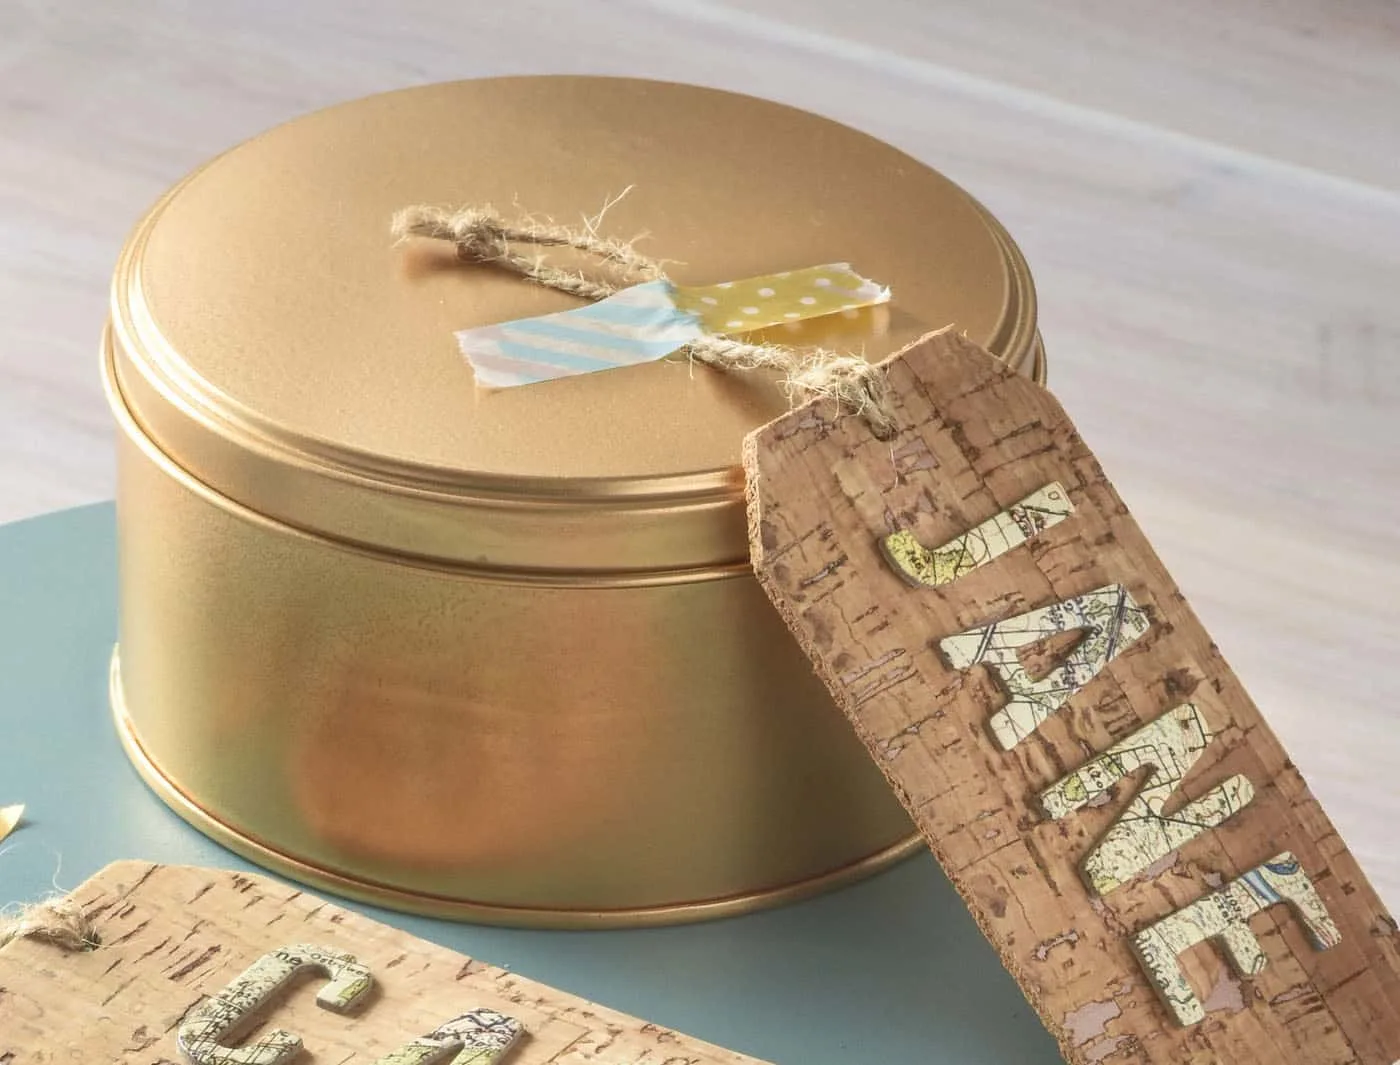 Gold spray painted cookie tin with a cork tag that says "Jane"